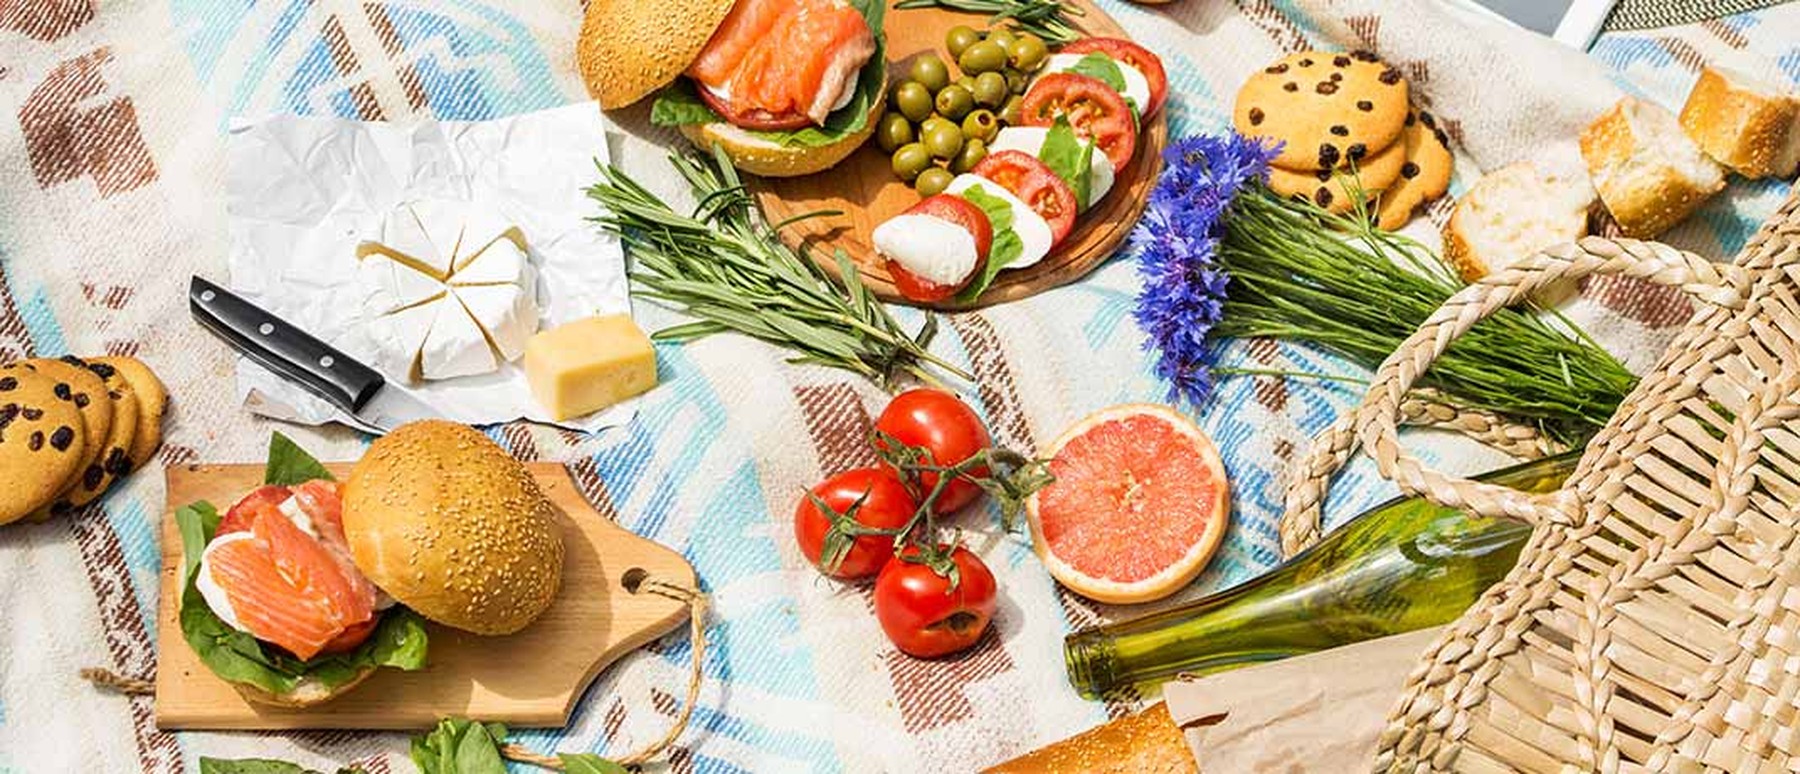 picnic setting on grass covered with a blanket with picnic food across it such as grapefruit, cookies, salmon bagel and tomatoes 